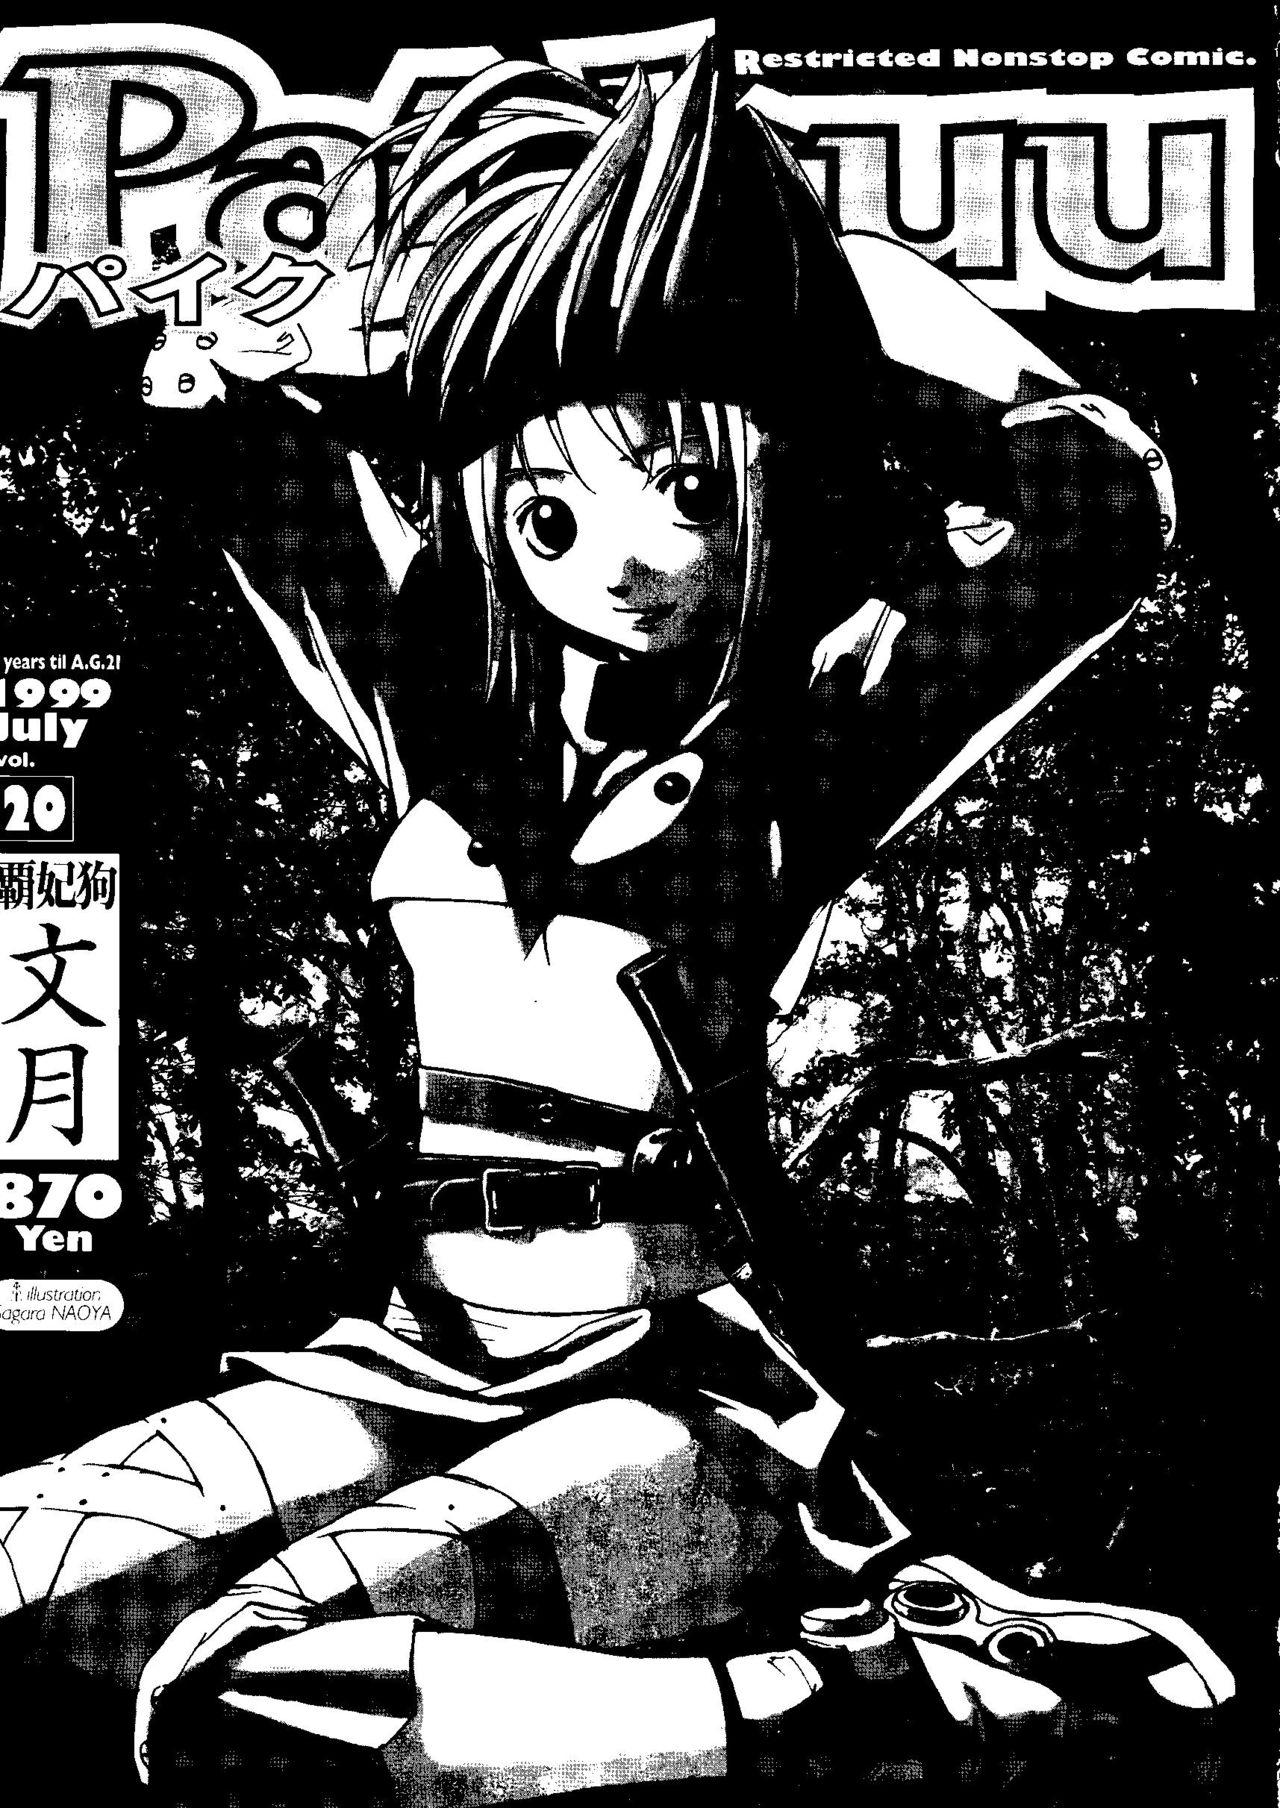 Tanned Pai;kuu 1999 July Vol. 20 - Street fighter To heart Detective conan Mamotte shugogetten Sorcerous stabber orphen Mamando - Page 2